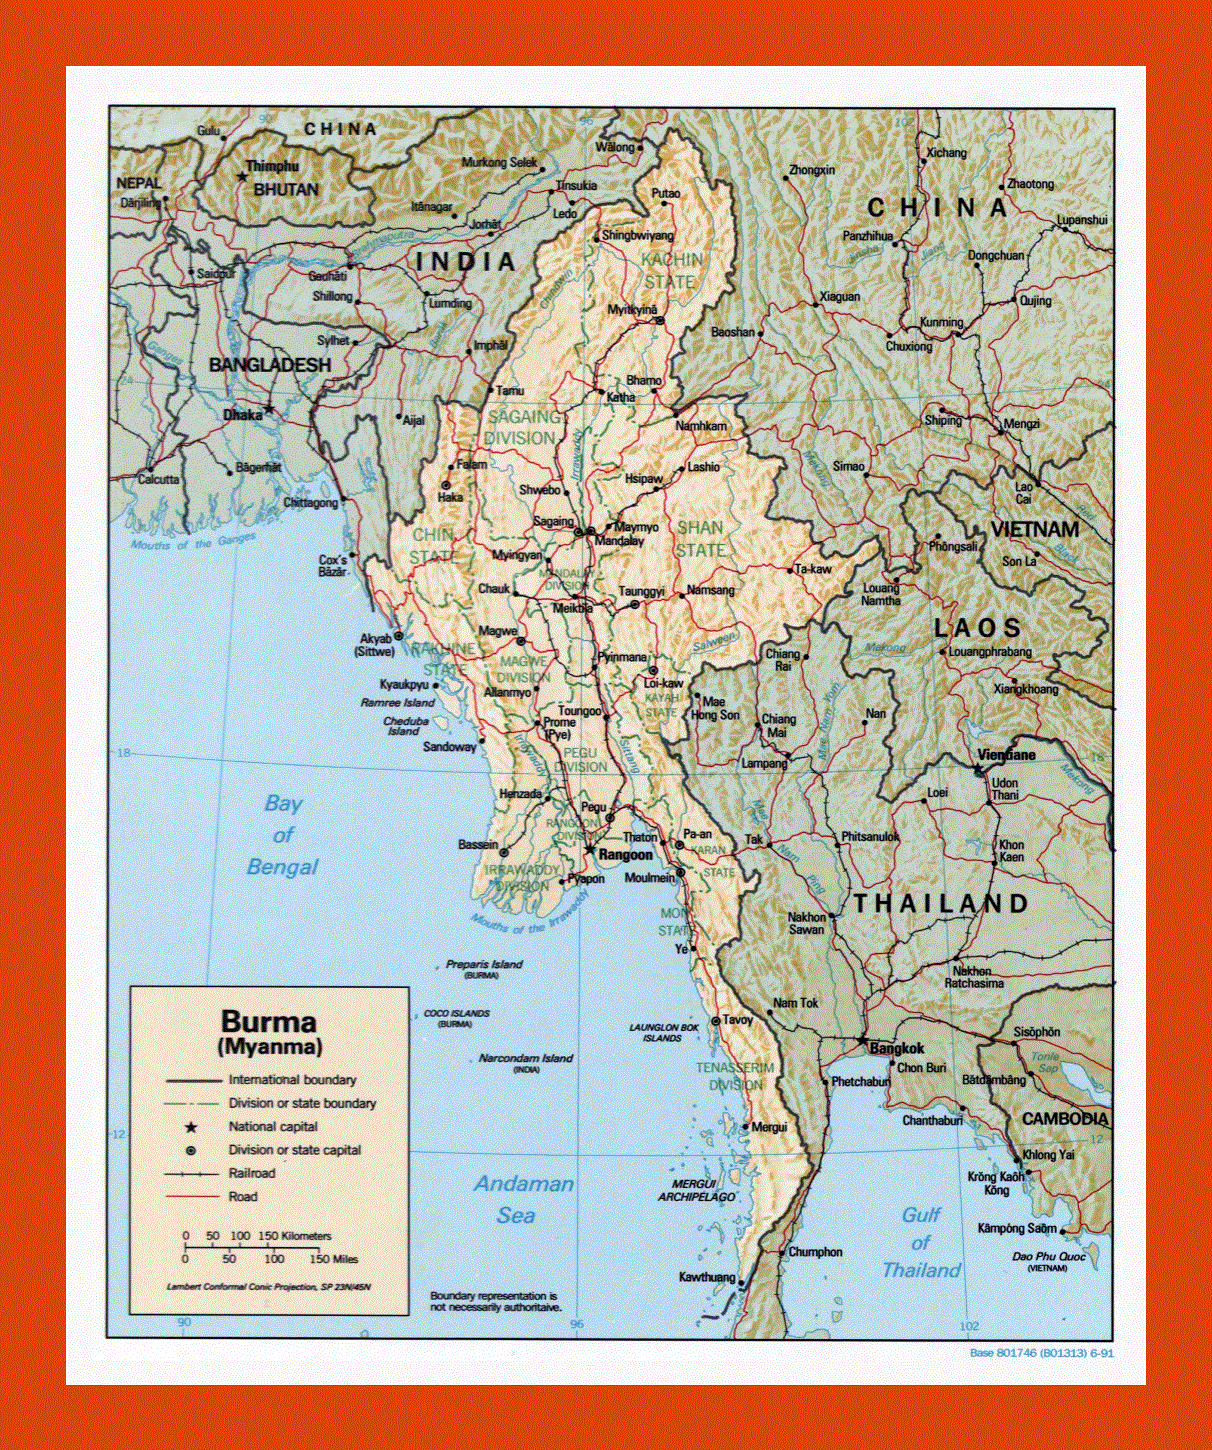 Political and administrative map of Burma (Myanmar) - 1991